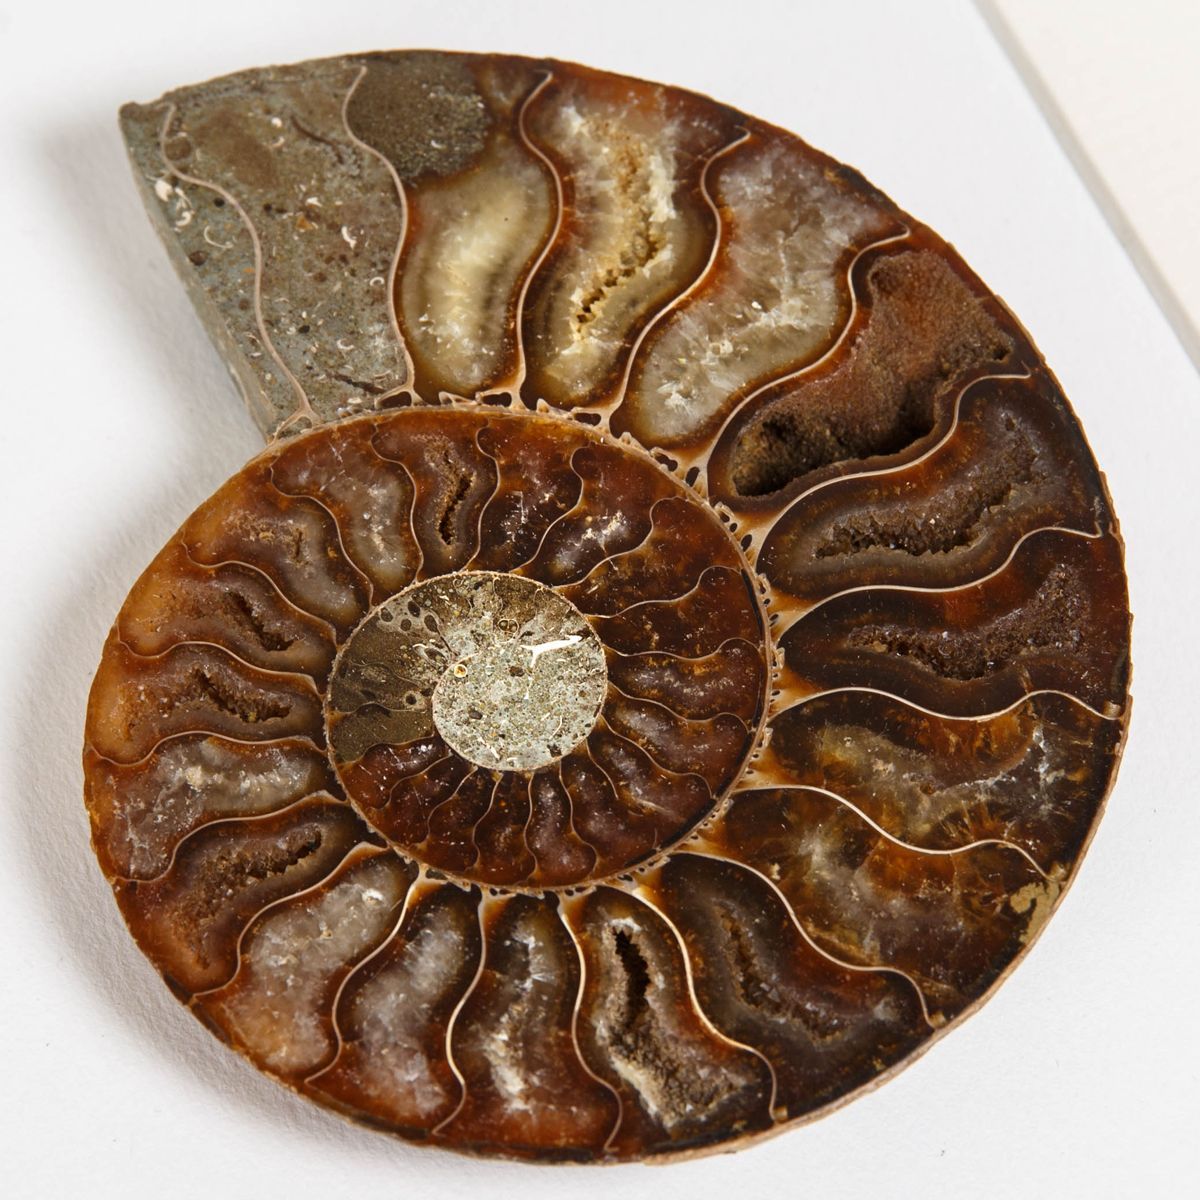 Cut and Polished Ammonite Fossil in Box Frame (Cleoniceras sp)